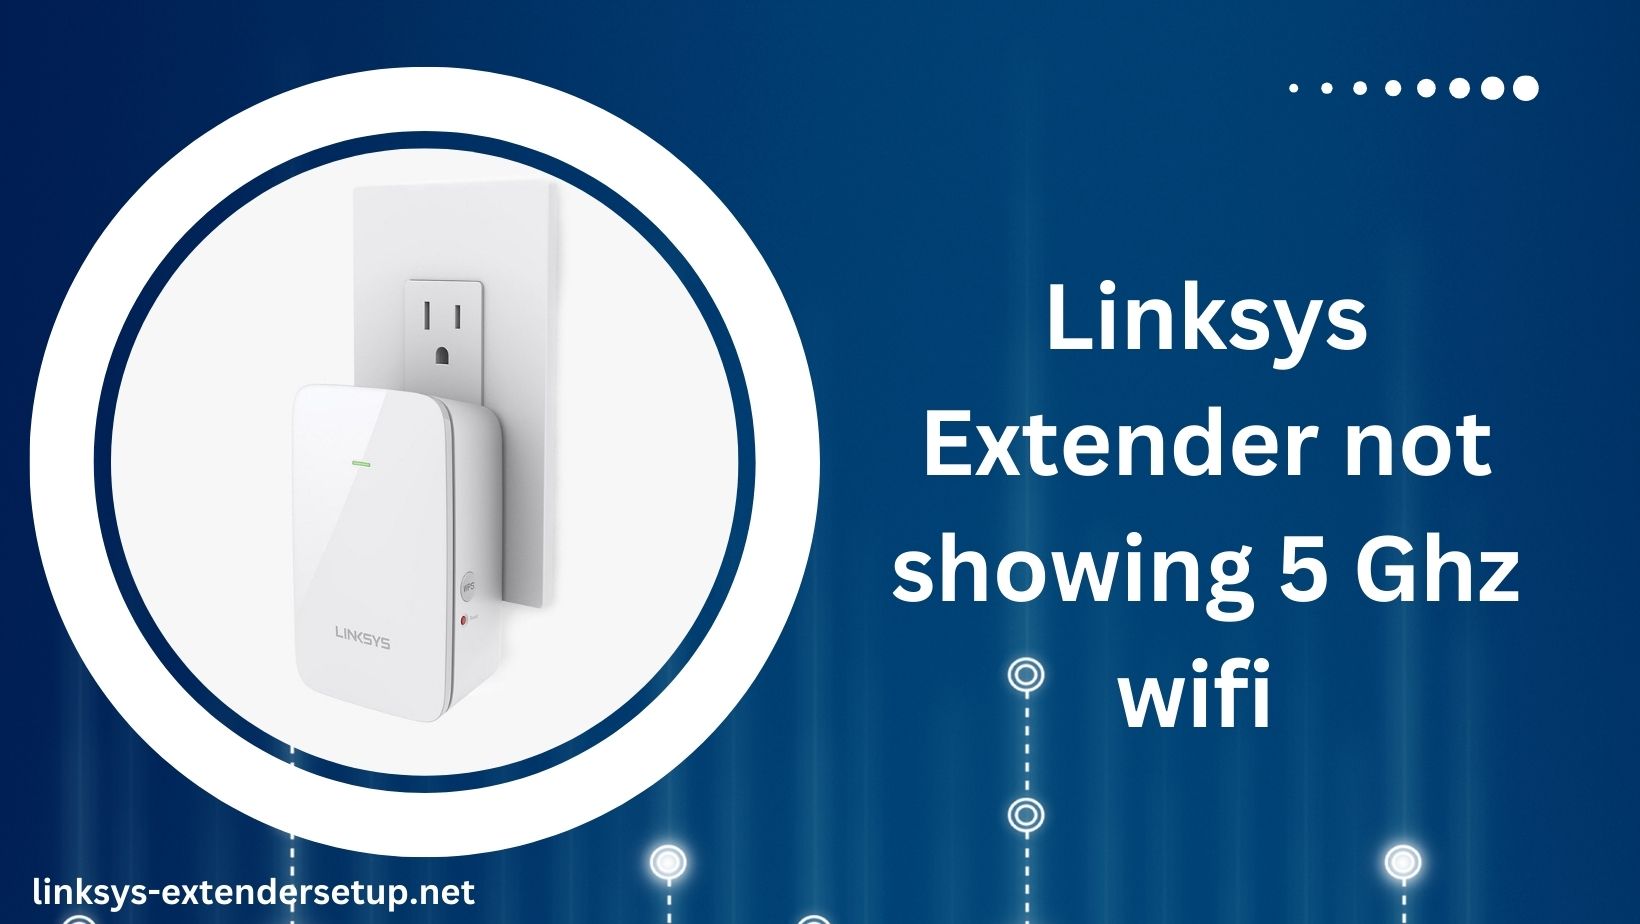 You are currently viewing Solutions for Linksys Extender not showing 5 Ghz wifi Issue